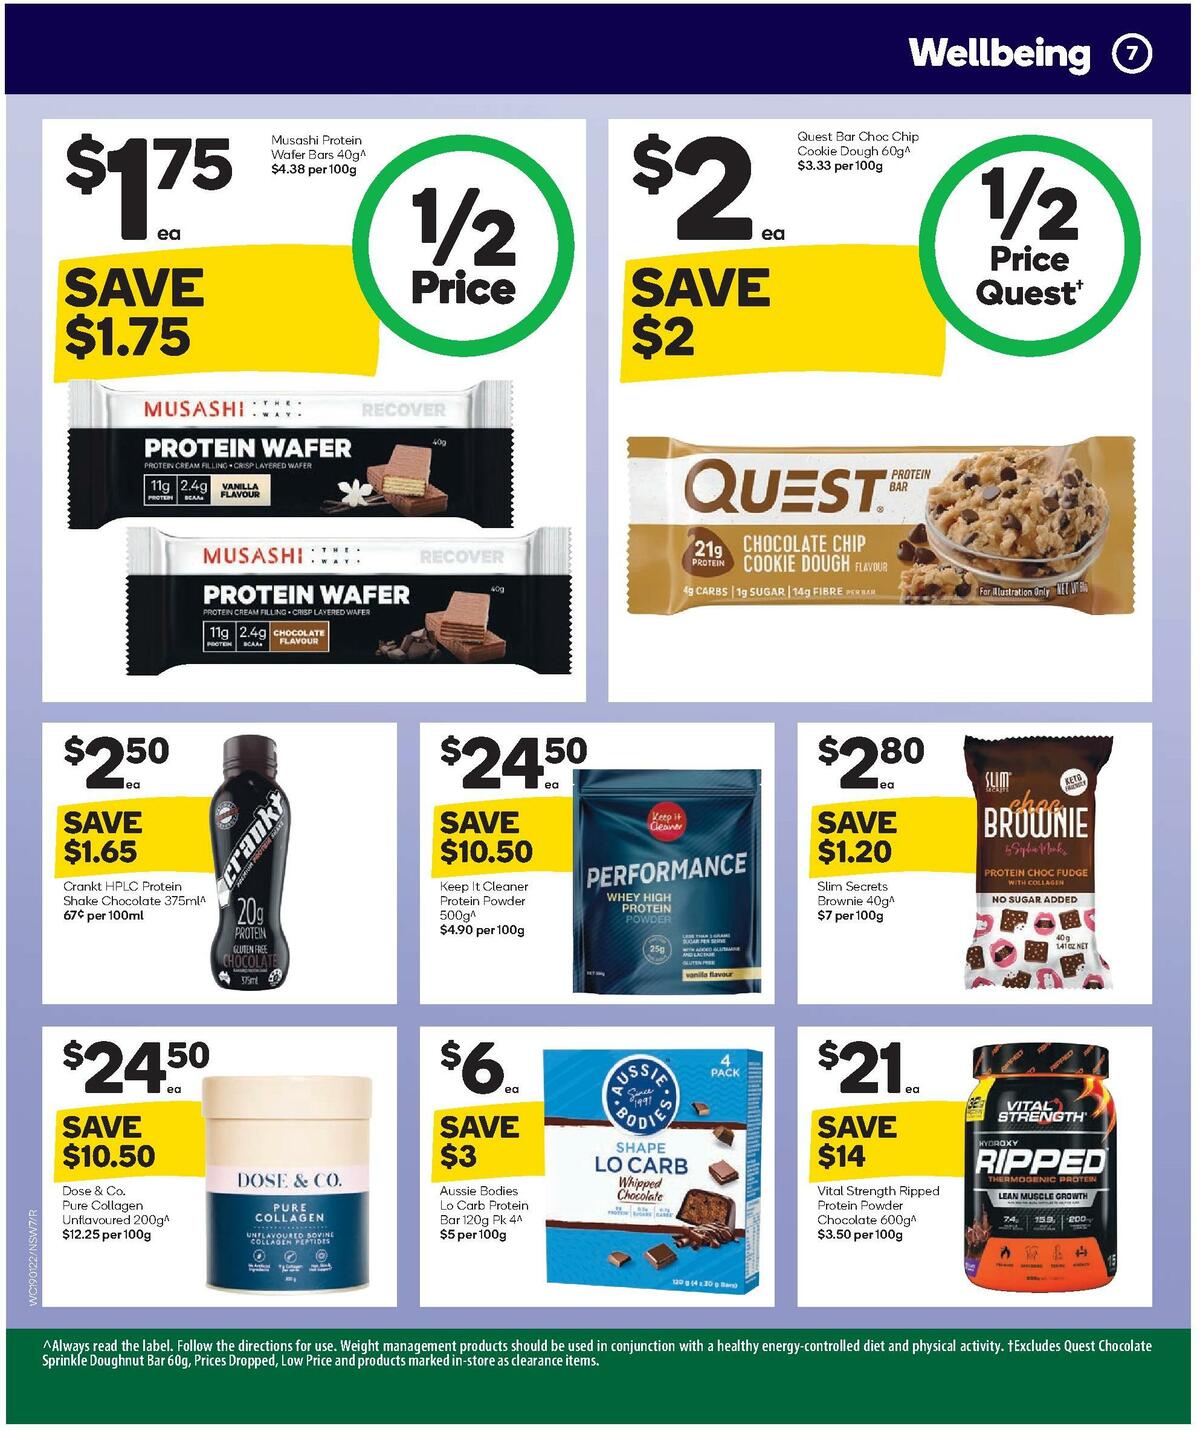 Woolworths Health & Beauty Catalogues from 19 January